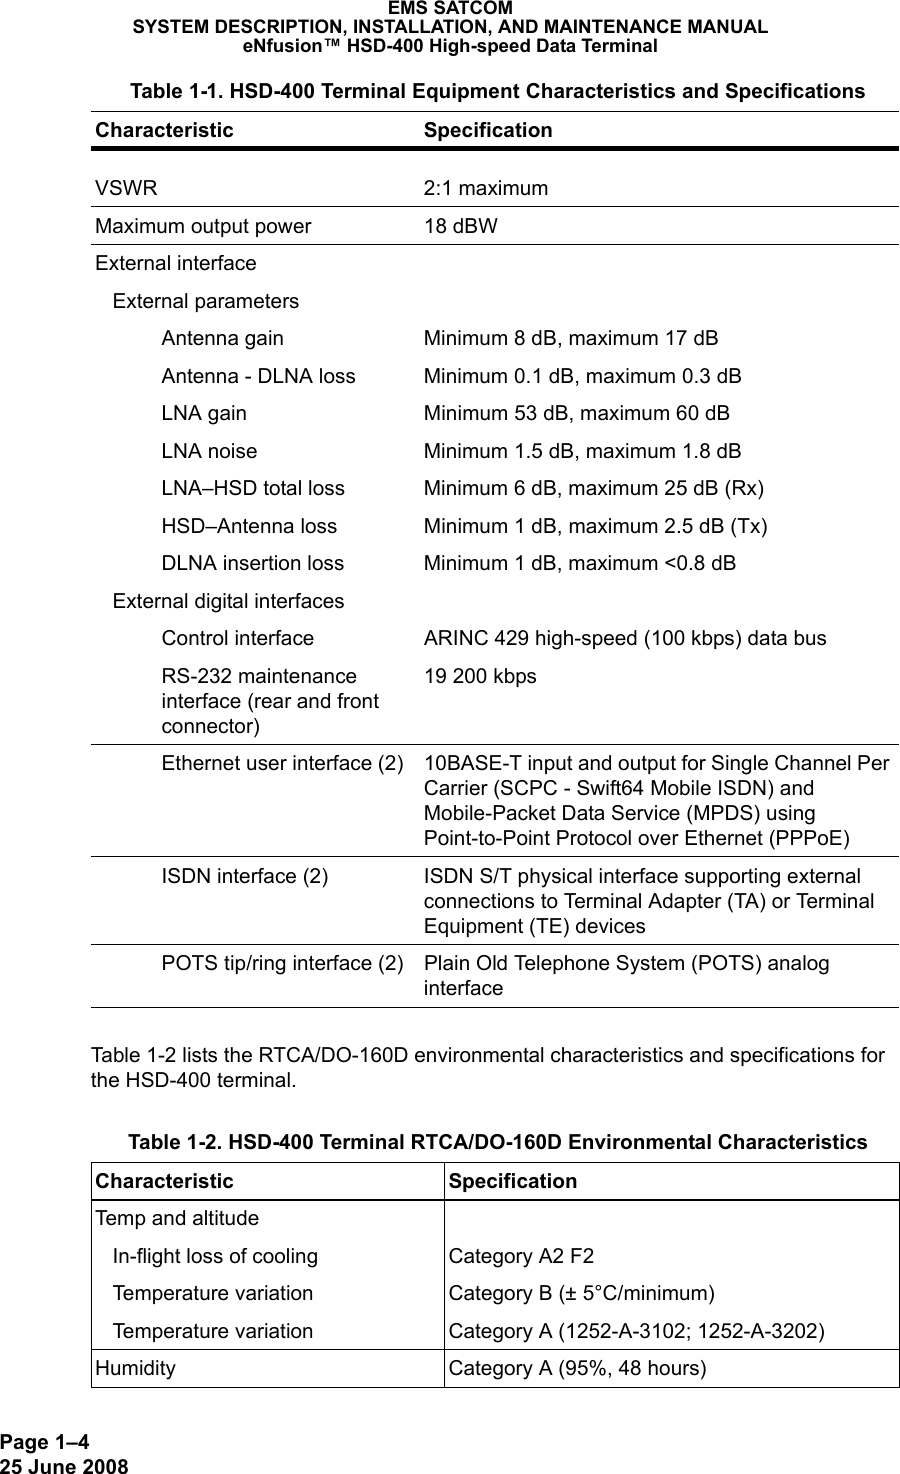 Page 1–425 June 2008 EMS SATCOMSYSTEM DESCRIPTION, INSTALLATION, AND MAINTENANCE MANUALeNfusion™ HSD-400 High-speed Data TerminalTable 1-2 lists the RTCA/DO-160D environmental characteristics and specifications for the HSD-400 terminal.VSWR 2:1 maximumMaximum output power 18 dBWExternal interface   External parametersAntenna gain Minimum 8 dB, maximum 17 dBAntenna - DLNA loss Minimum 0.1 dB, maximum 0.3 dBLNA gain Minimum 53 dB, maximum 60 dBLNA noise Minimum 1.5 dB, maximum 1.8 dBLNA–HSD total loss Minimum 6 dB, maximum 25 dB (Rx)HSD–Antenna loss Minimum 1 dB, maximum 2.5 dB (Tx)DLNA insertion loss Minimum 1 dB, maximum &lt;0.8 dB   External digital interfacesControl interface ARINC 429 high-speed (100 kbps) data busRS-232 maintenance interface (rear and front connector)19 200 kbpsEthernet user interface (2) 10BASE-T input and output for Single Channel Per Carrier (SCPC - Swift64 Mobile ISDN) and Mobile-Packet Data Service (MPDS) using Point-to-Point Protocol over Ethernet (PPPoE)ISDN interface (2) ISDN S/T physical interface supporting external connections to Terminal Adapter (TA) or Terminal Equipment (TE) devicesPOTS tip/ring interface (2) Plain Old Telephone System (POTS) analog interface Table 1-2. HSD-400 Terminal RTCA/DO-160D Environmental Characteristics Characteristic SpecificationTemp and altitude   In-flight loss of cooling   Temperature variation   Temperature variationCategory A2 F2Category B (± 5°C/minimum)Category A (1252-A-3102; 1252-A-3202)Humidity Category A (95%, 48 hours) Table 1-1. HSD-400 Terminal Equipment Characteristics and Specifications Characteristic Specification